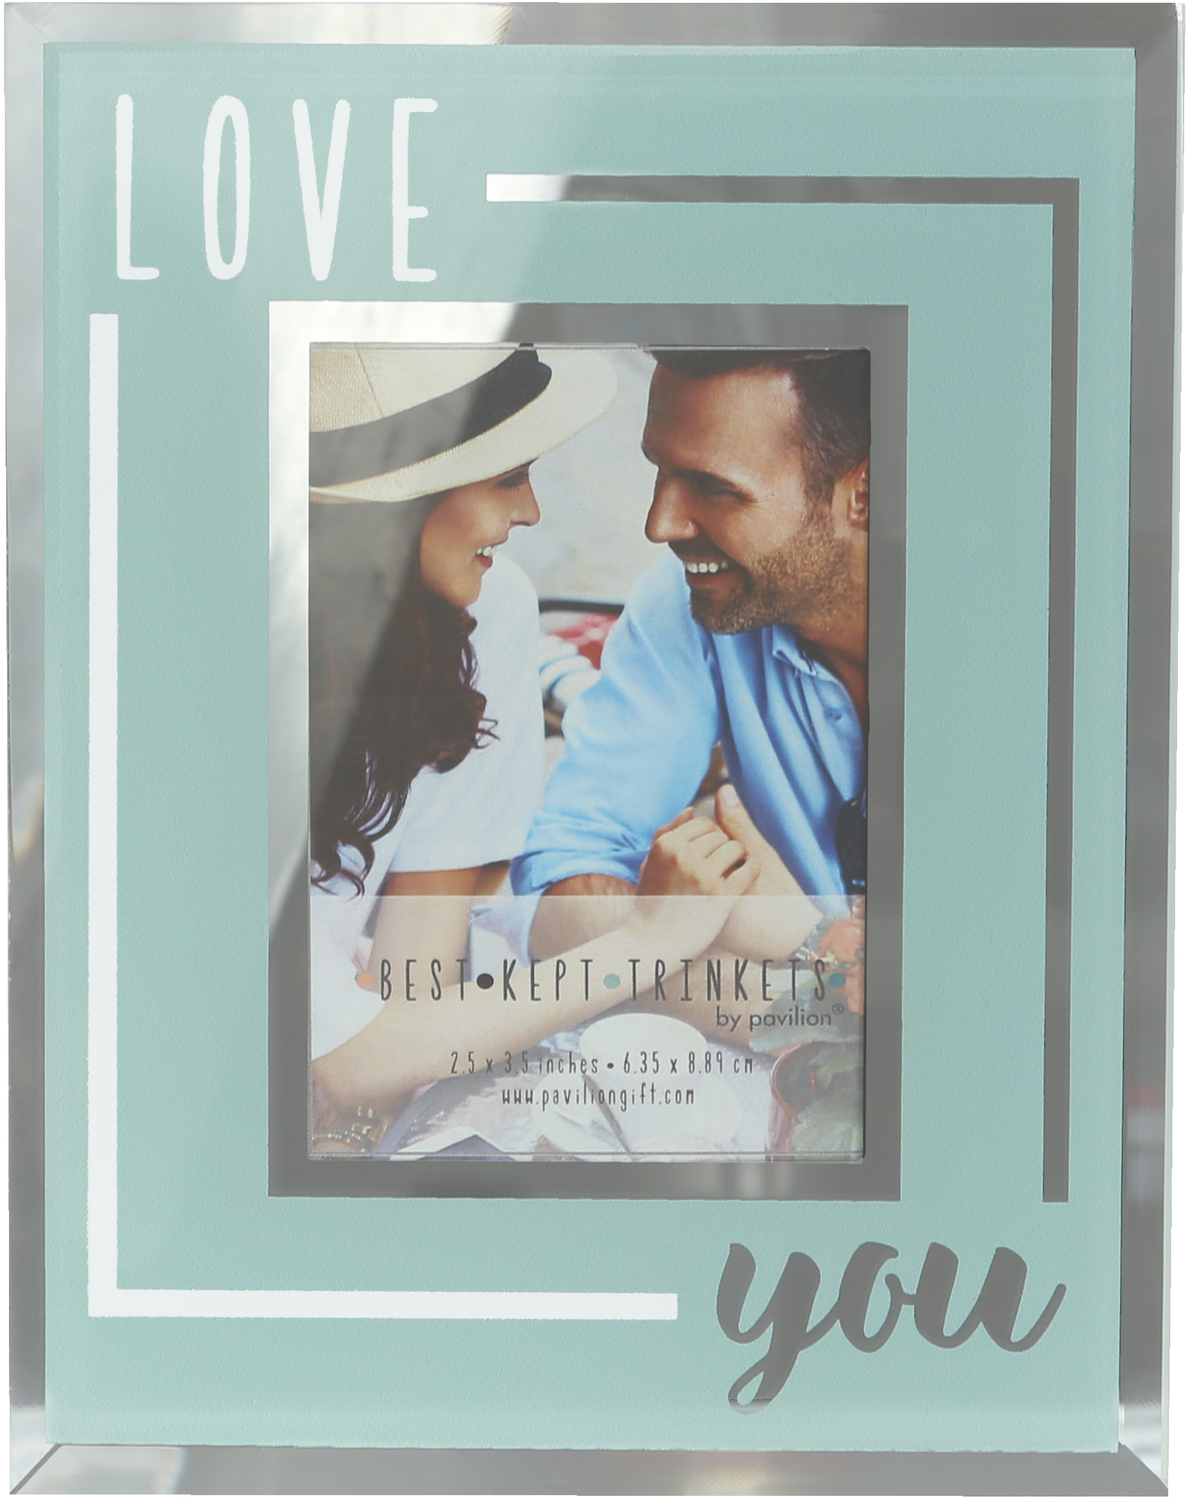 Love You by Best Kept Trinkets - Love You - 4.75" X 6" Frame
(Holds a 2.5" X 3.5" Photo)